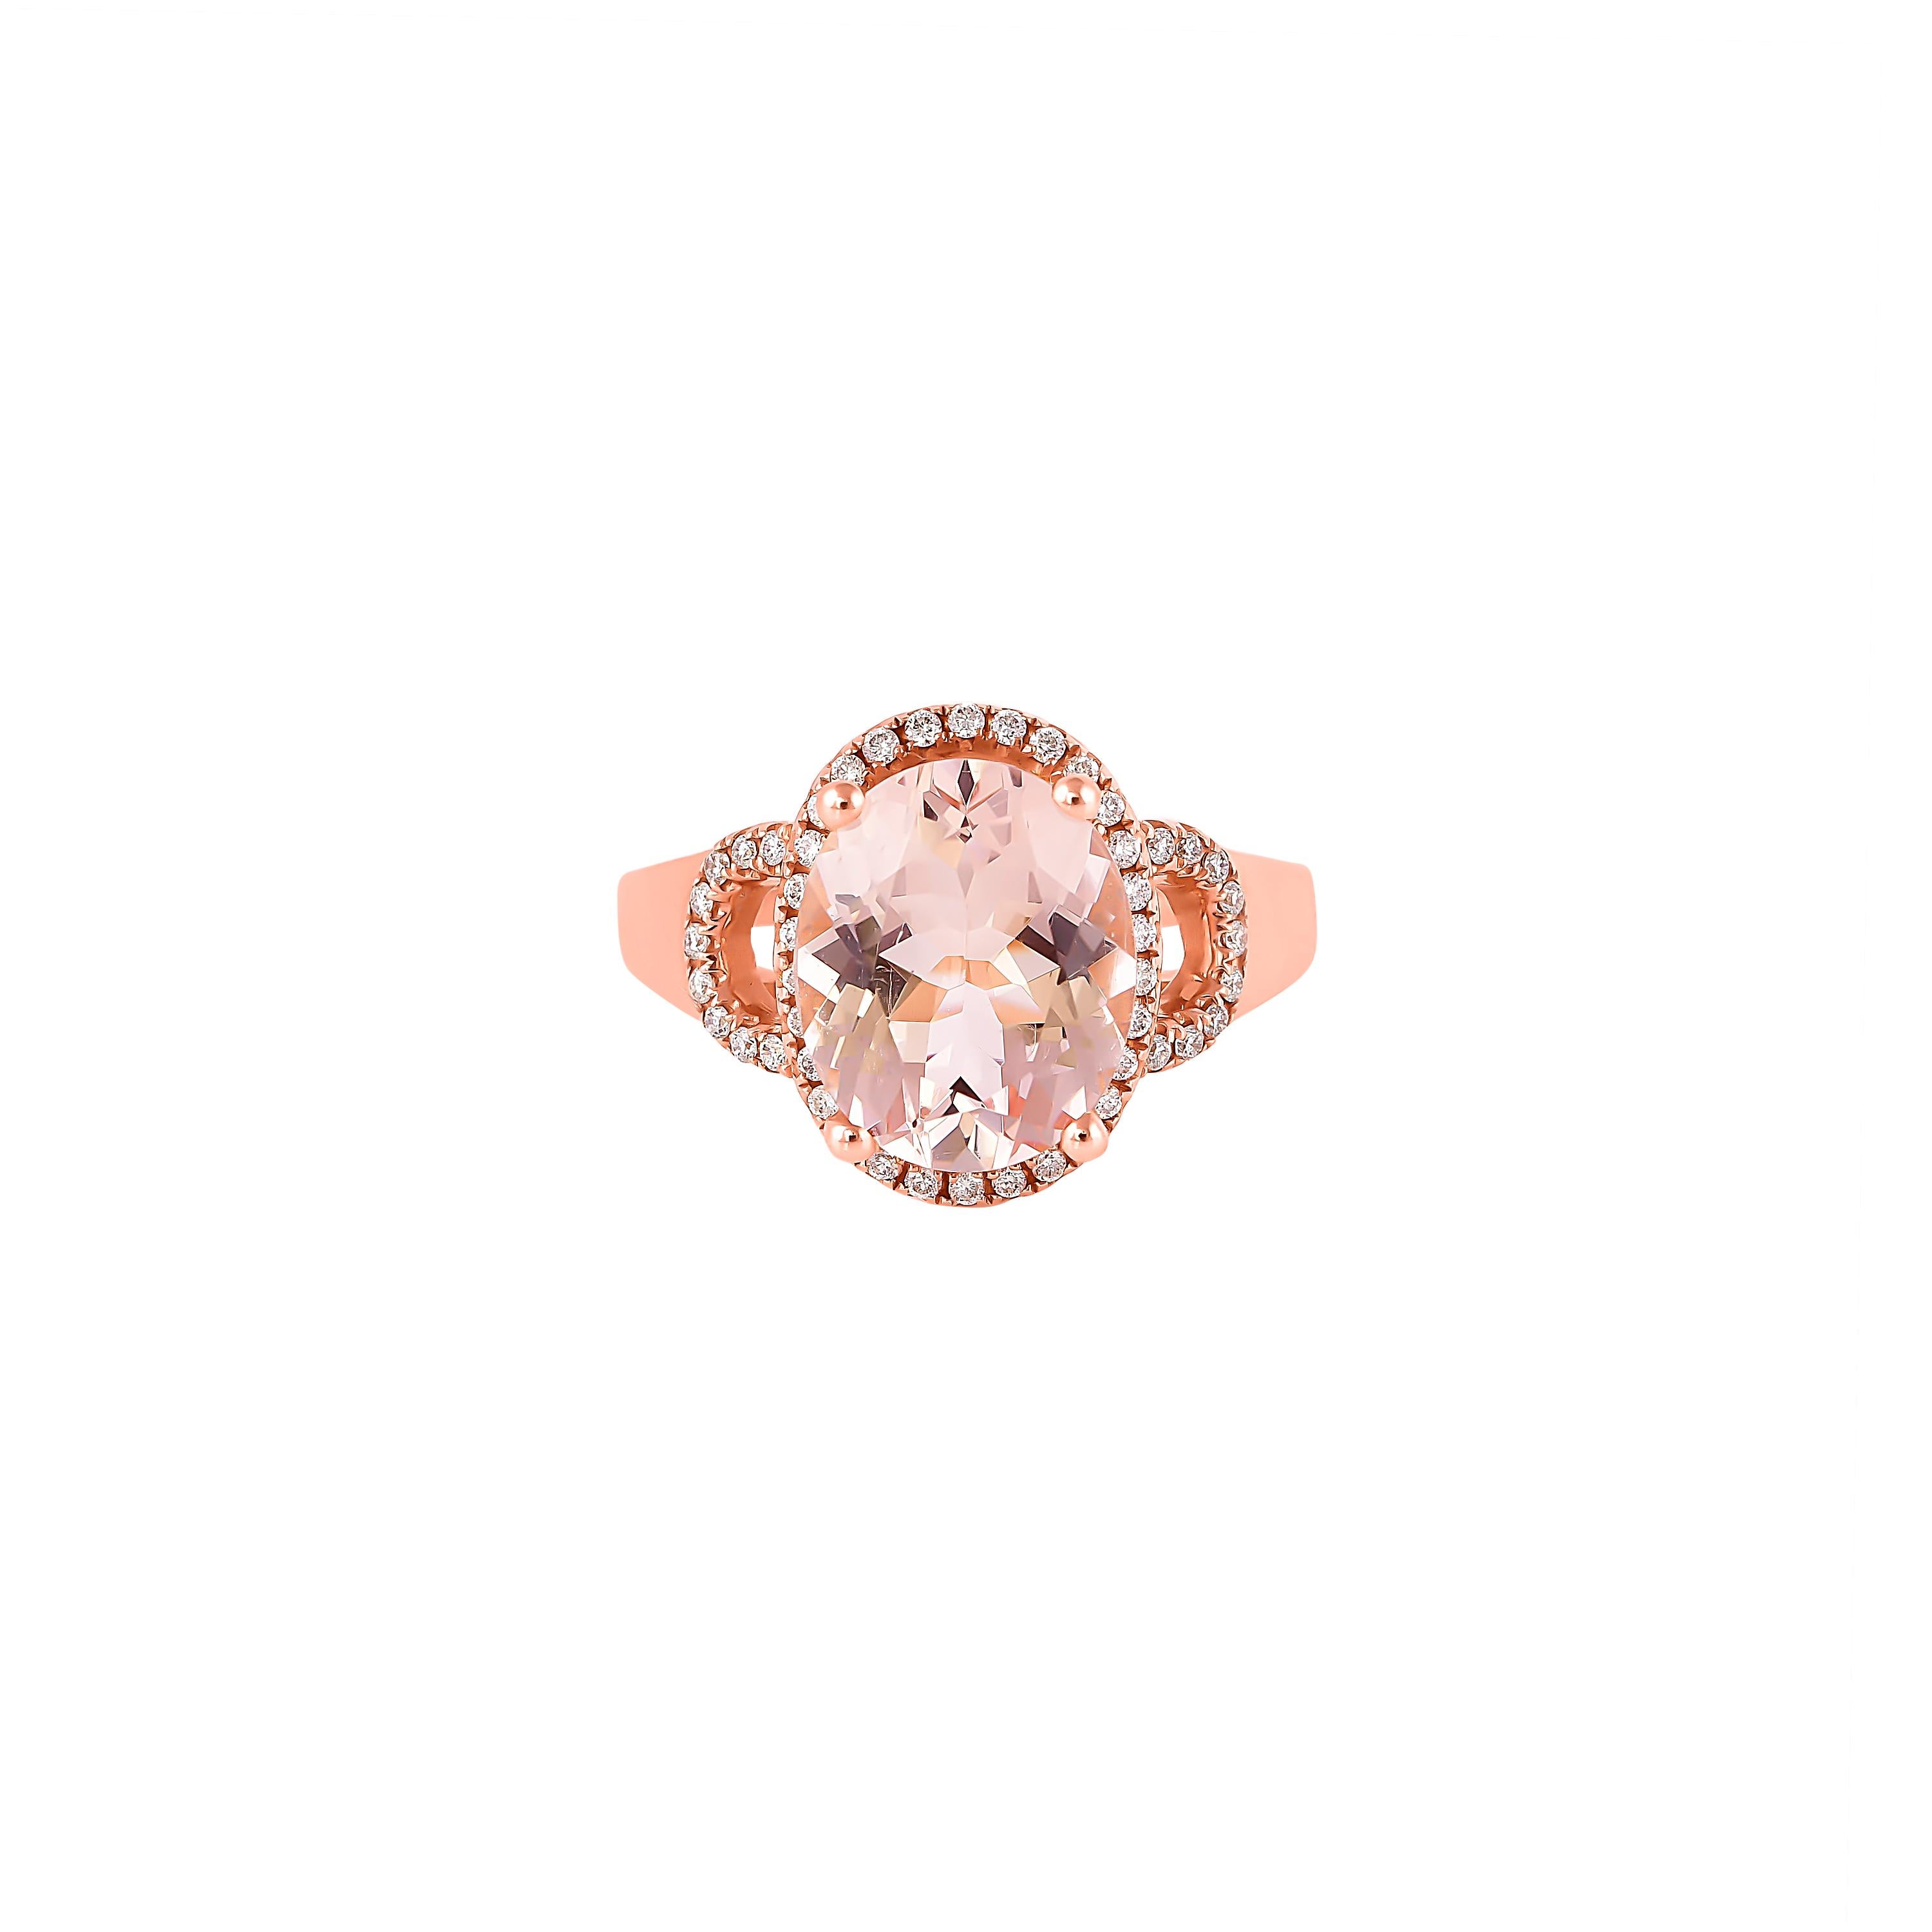 Contemporary 4.1 Carat Morganite and Diamond Ring in 18 Karat Rose Gold For Sale